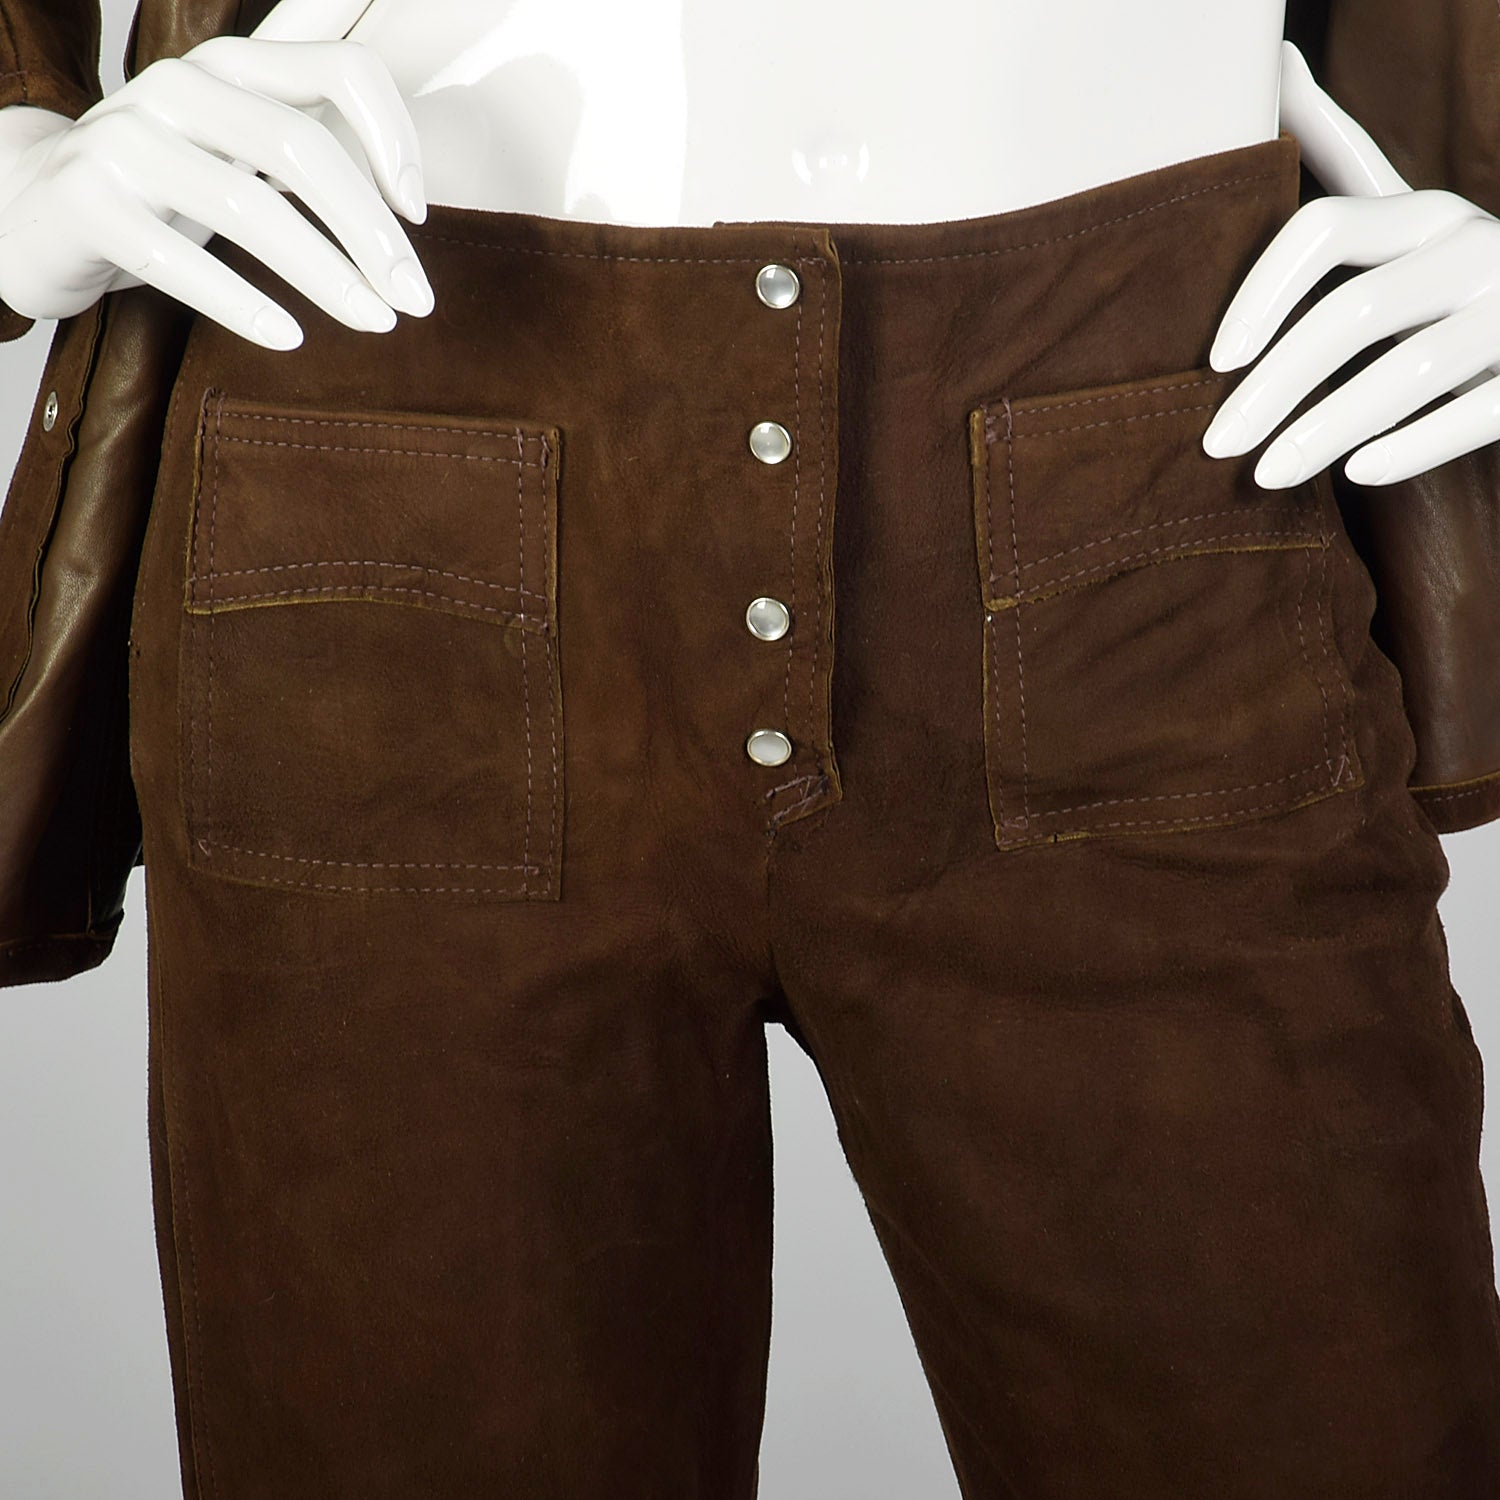 XXS 1970s Brown Suede Leather Top and Pants Set